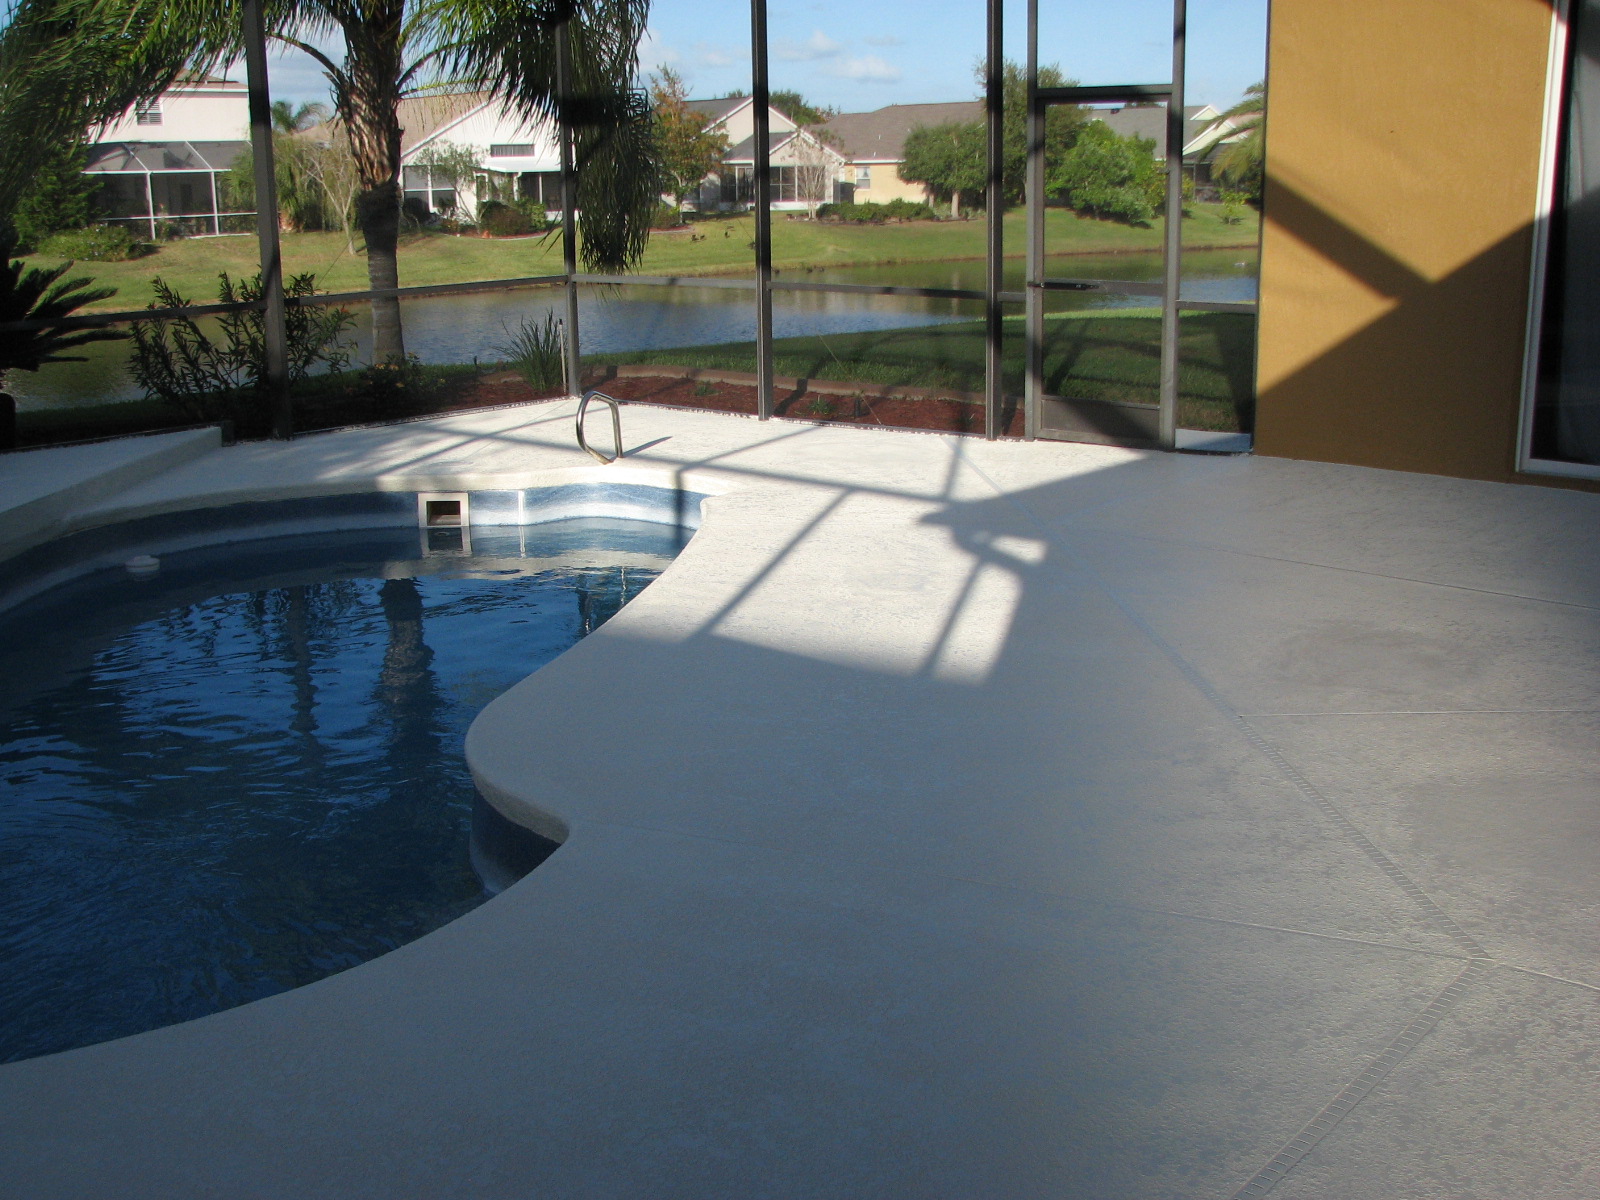 Pool Deck and Lanai- First coated